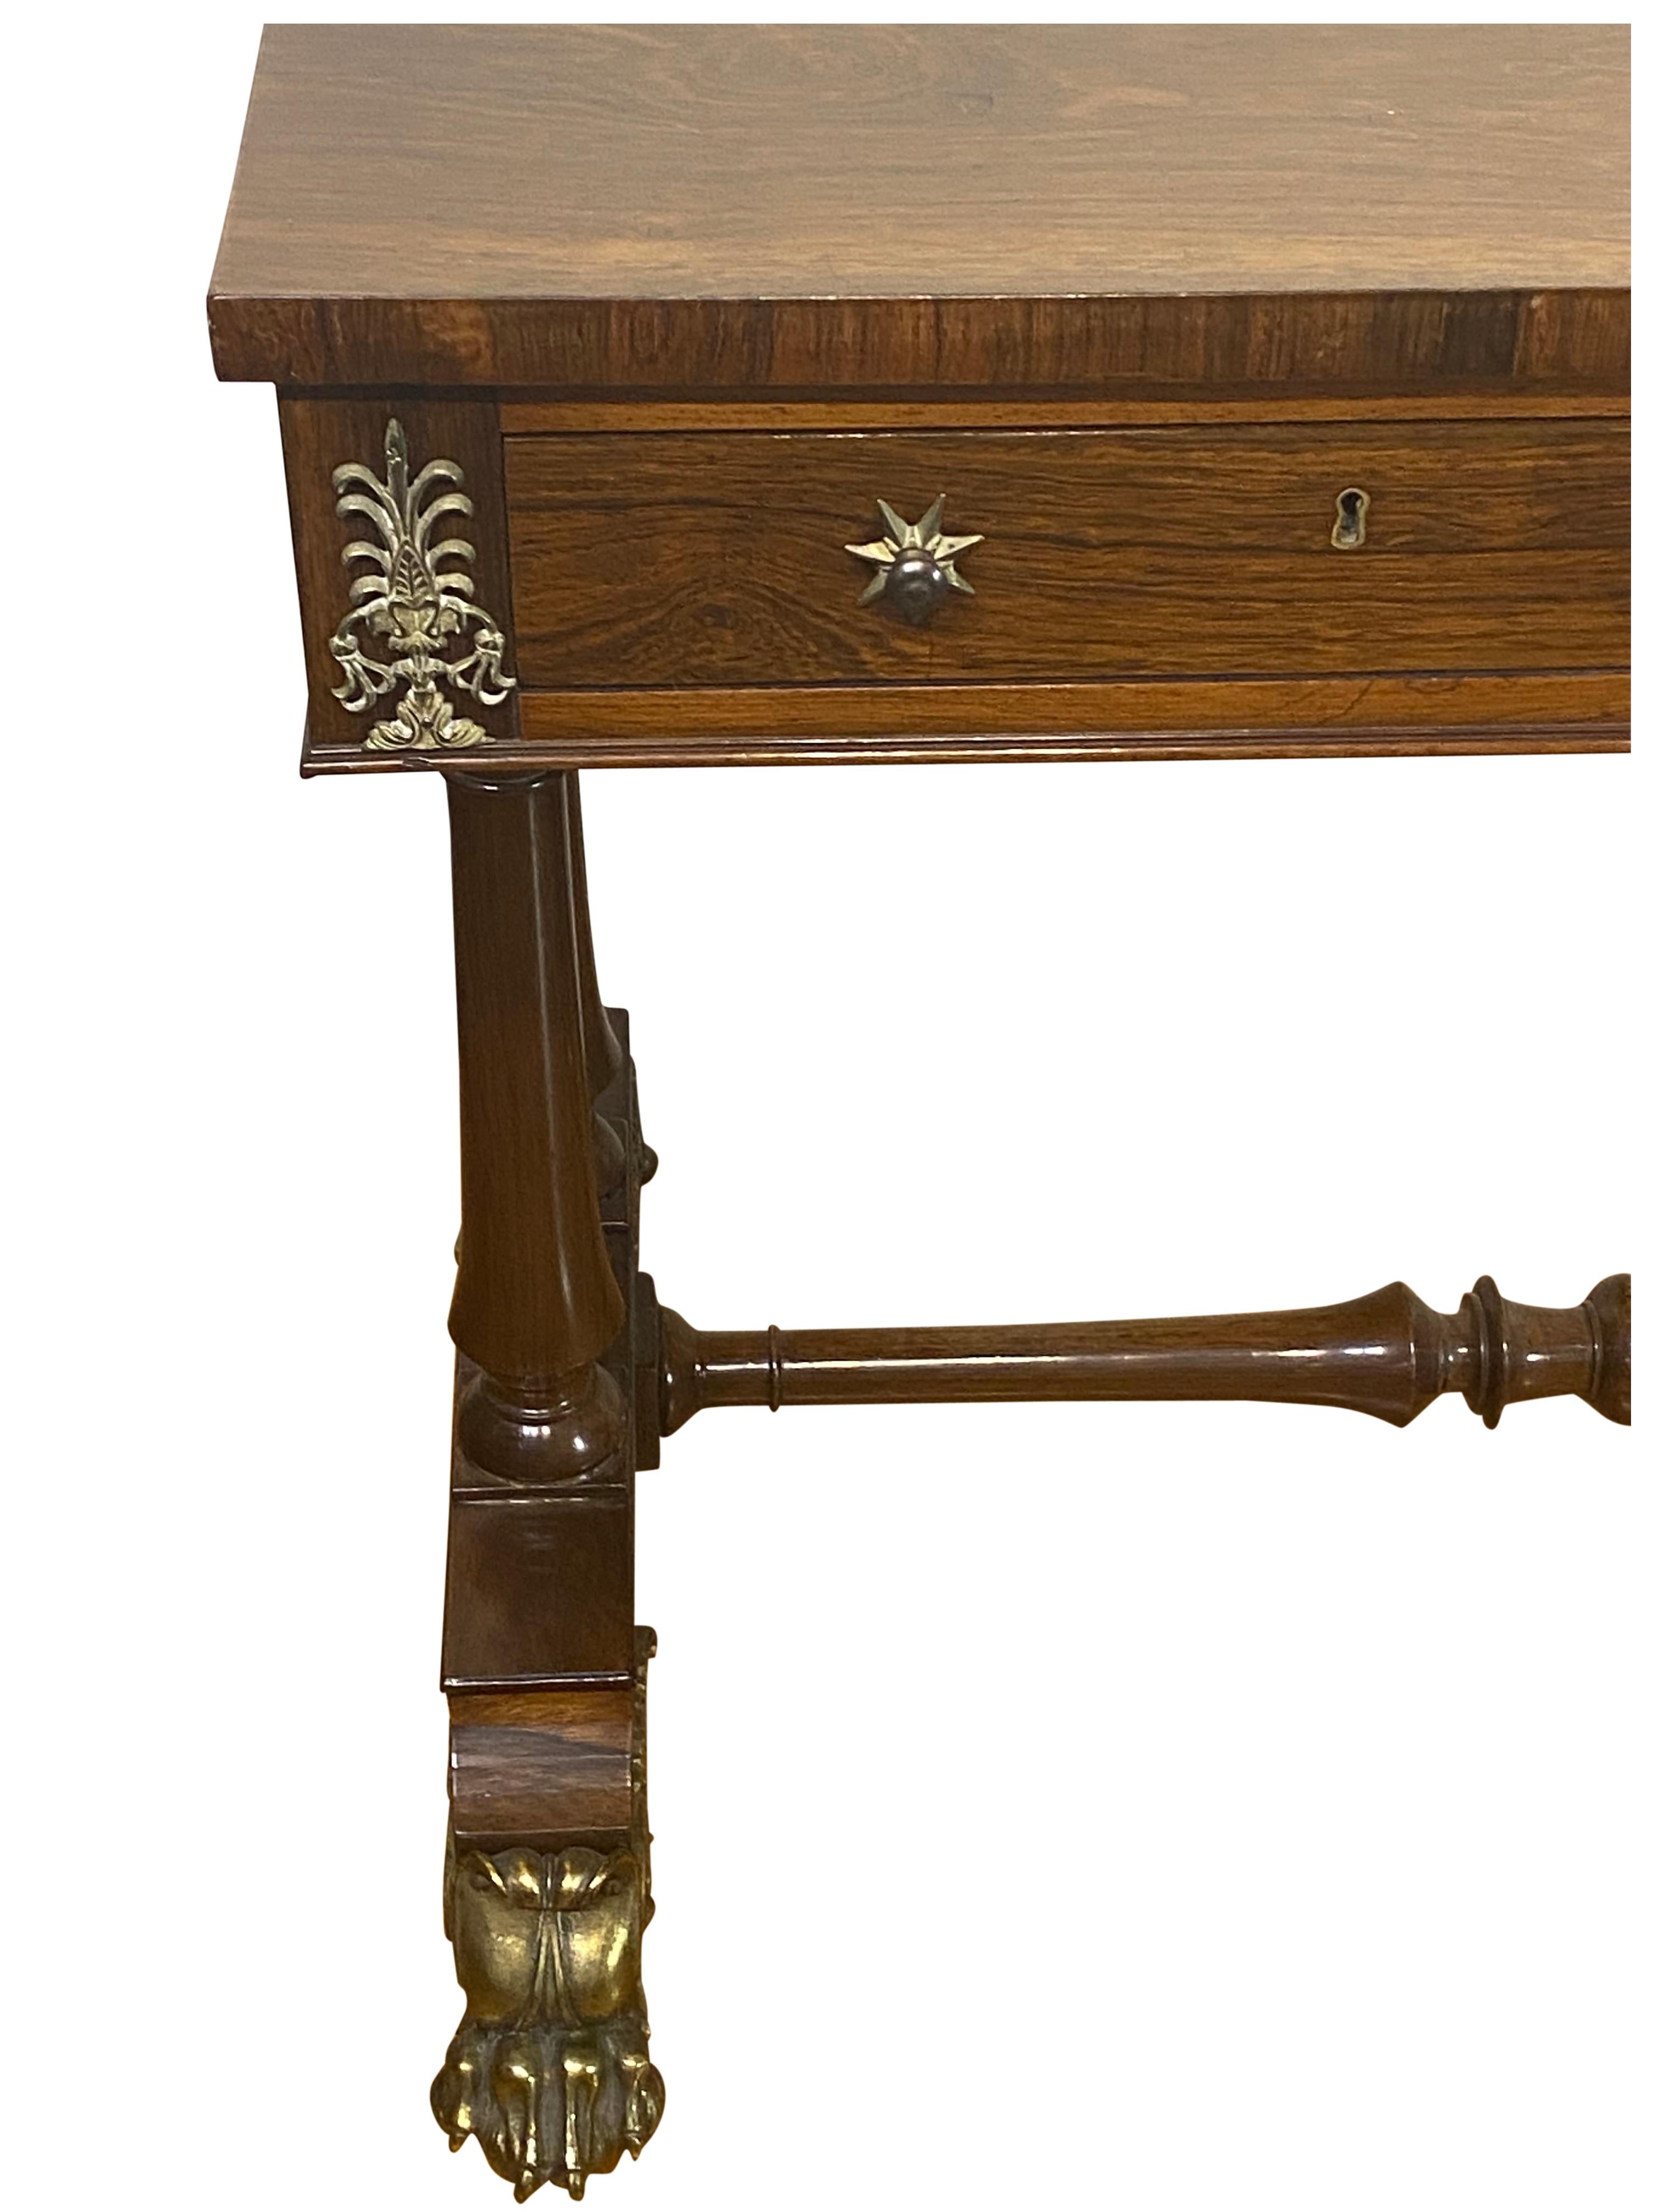 British Regency Rosewood and Bronze Mounted Writing Table circa 1825